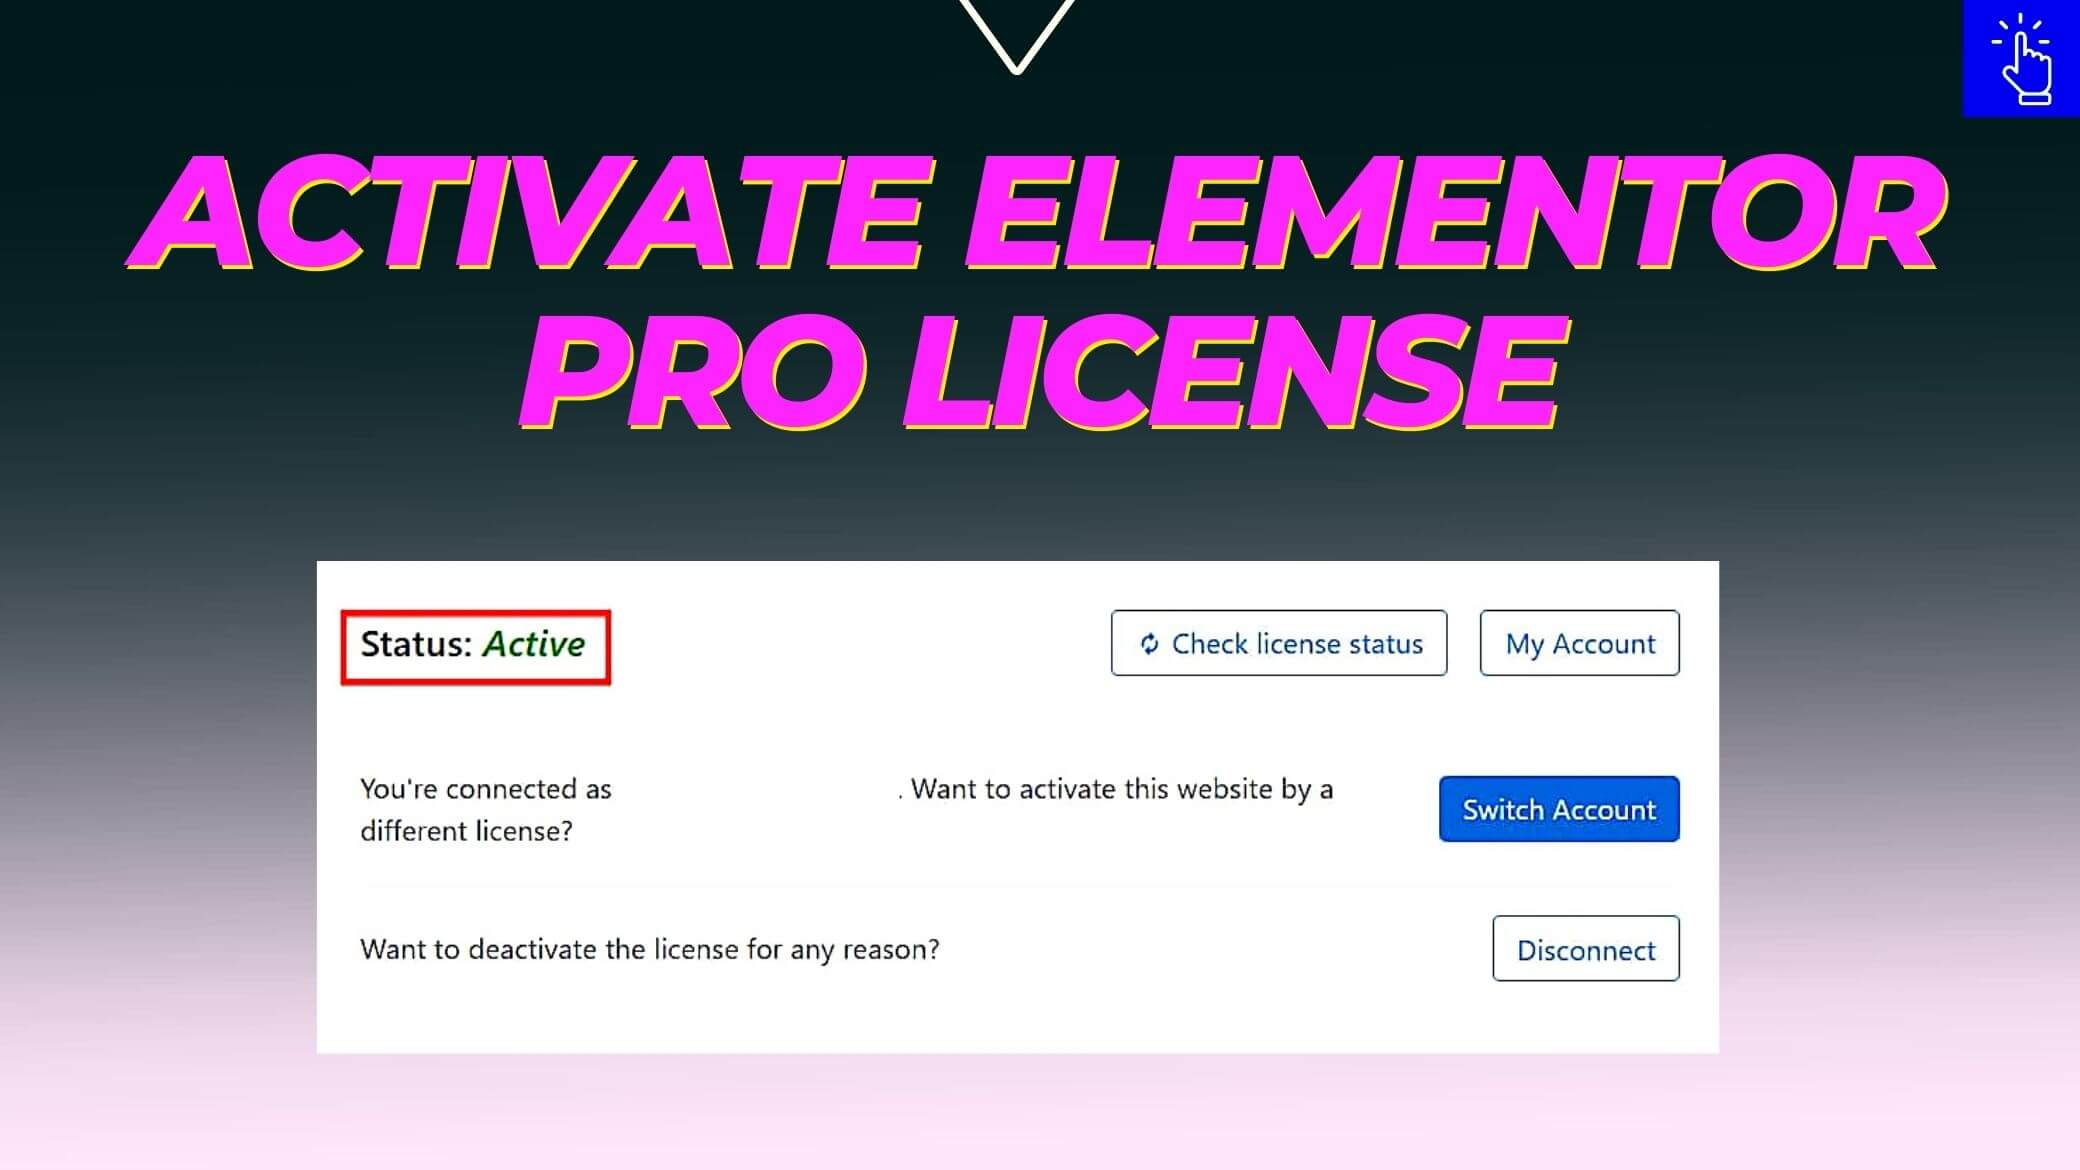 How to Activate Elementor Pro License in WordPress